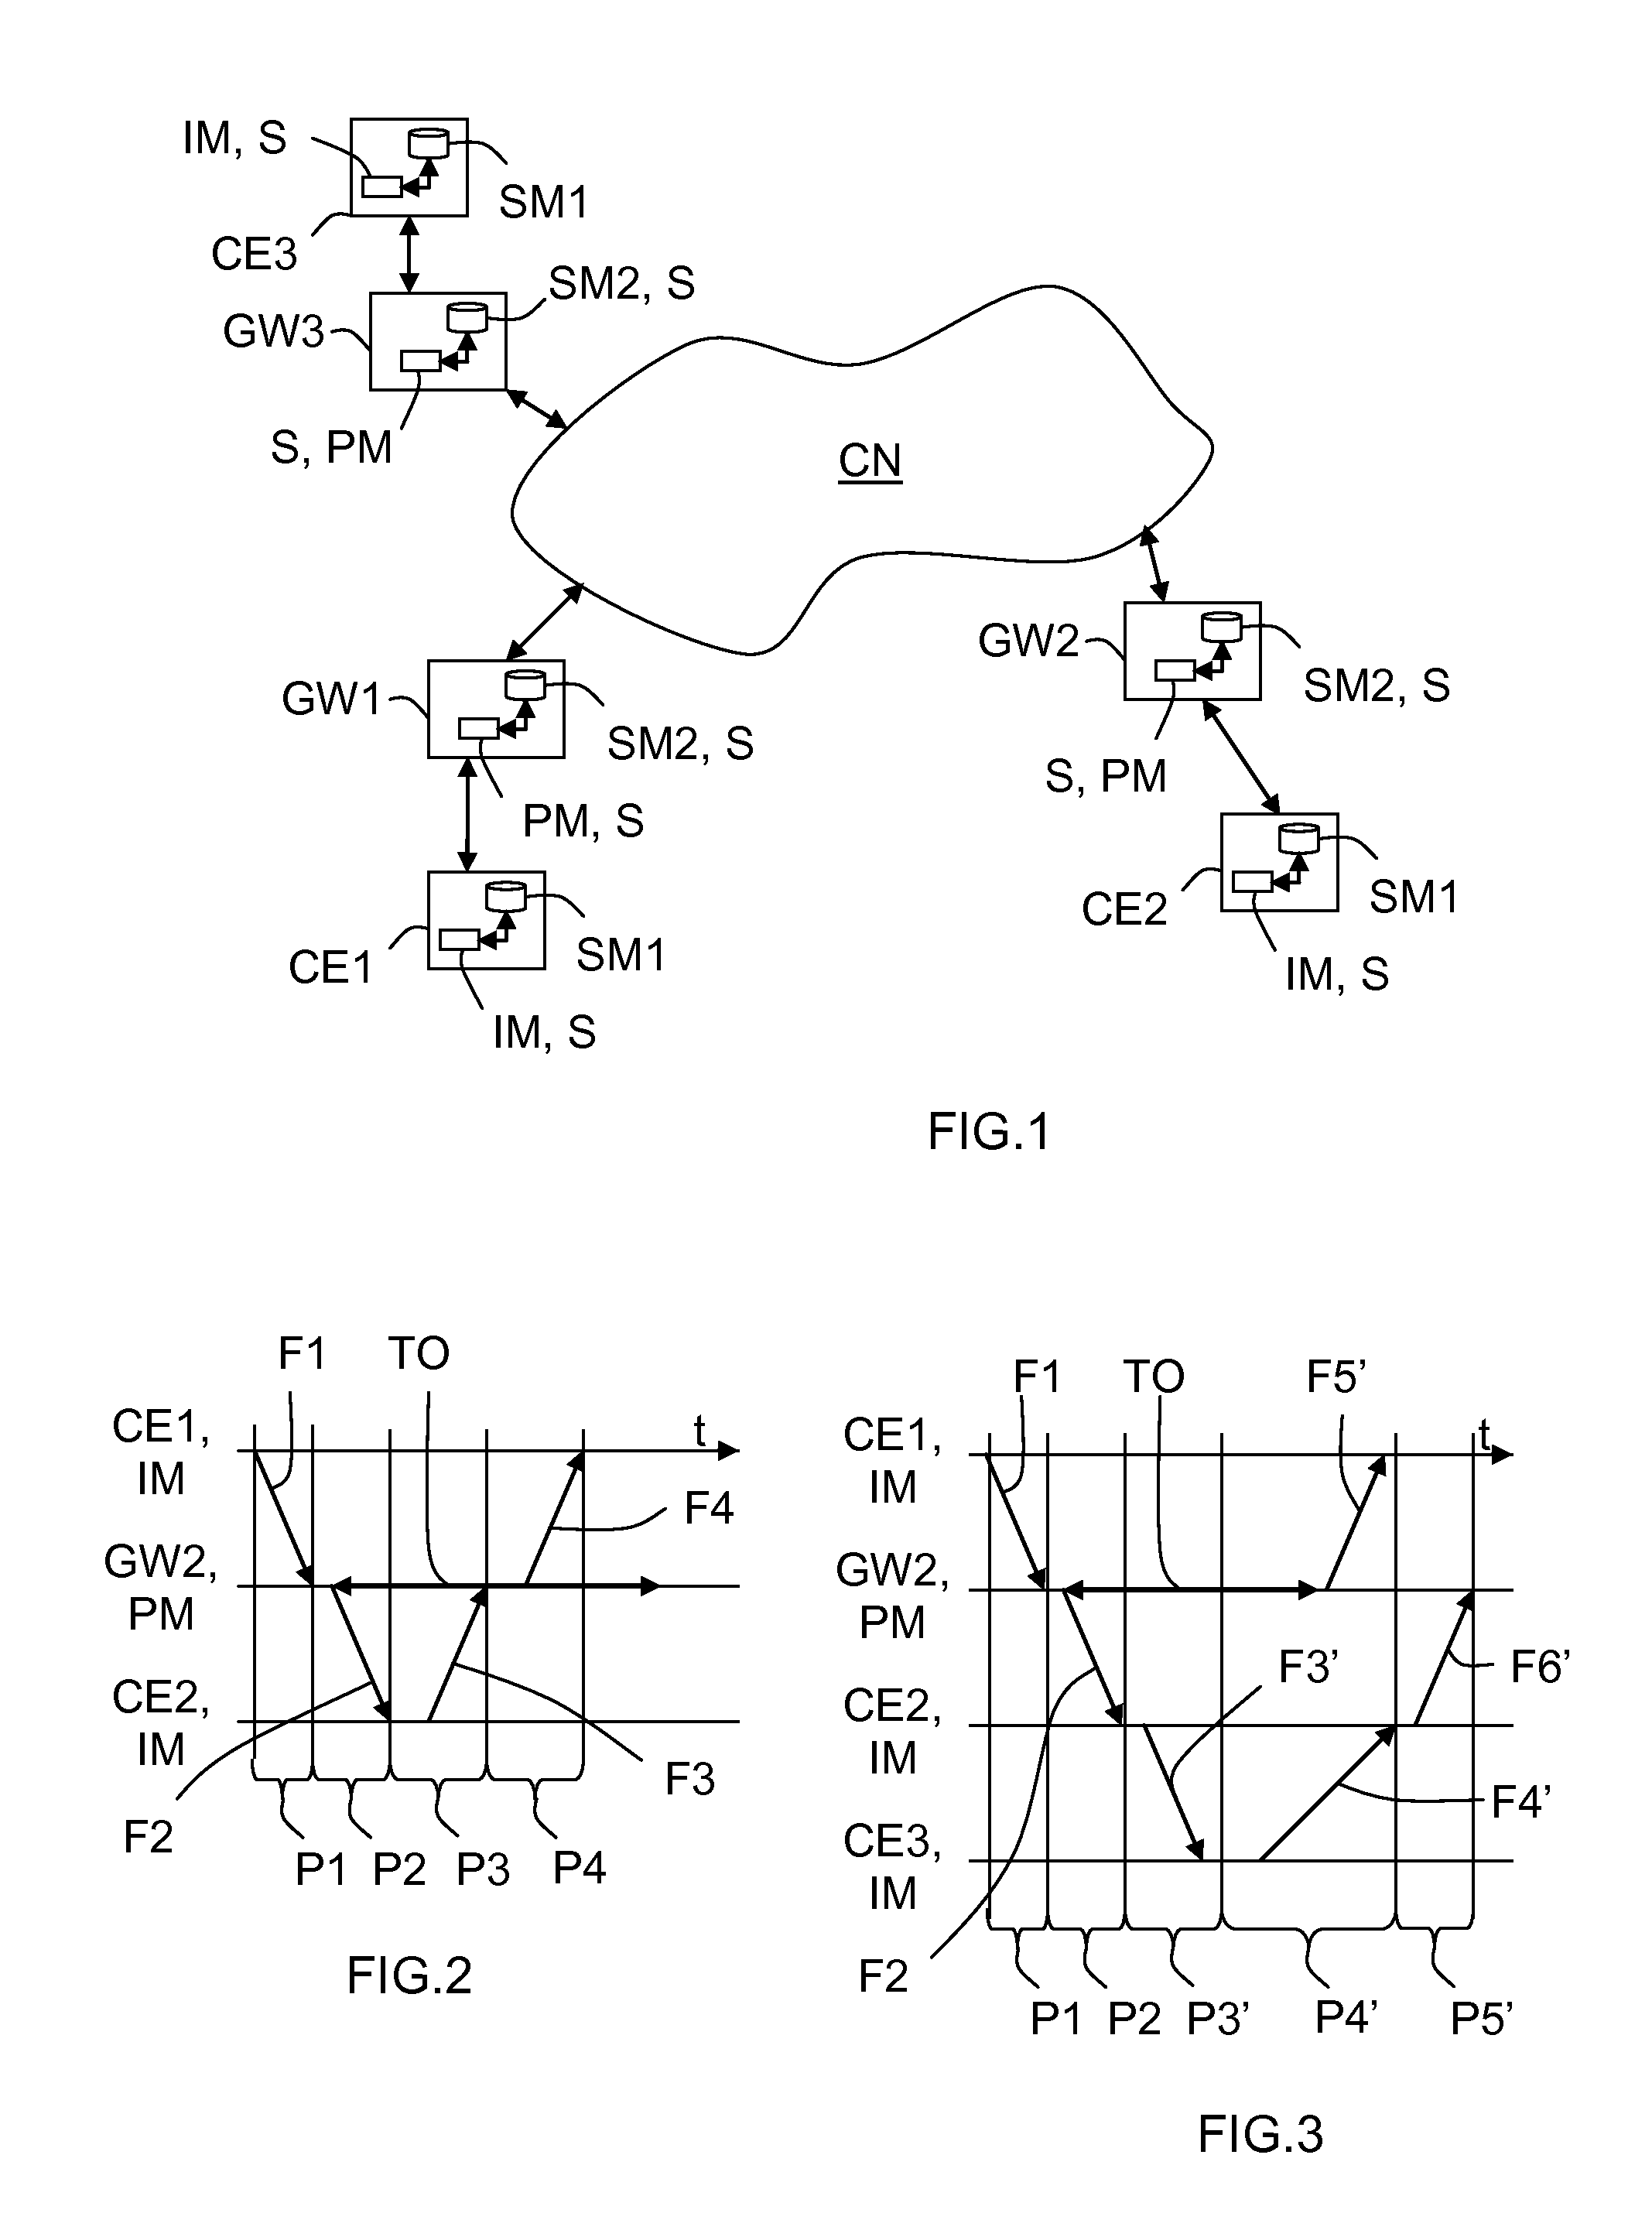 System and method for automatically verifying storage of redundant contents into communication equipments, by data comparison